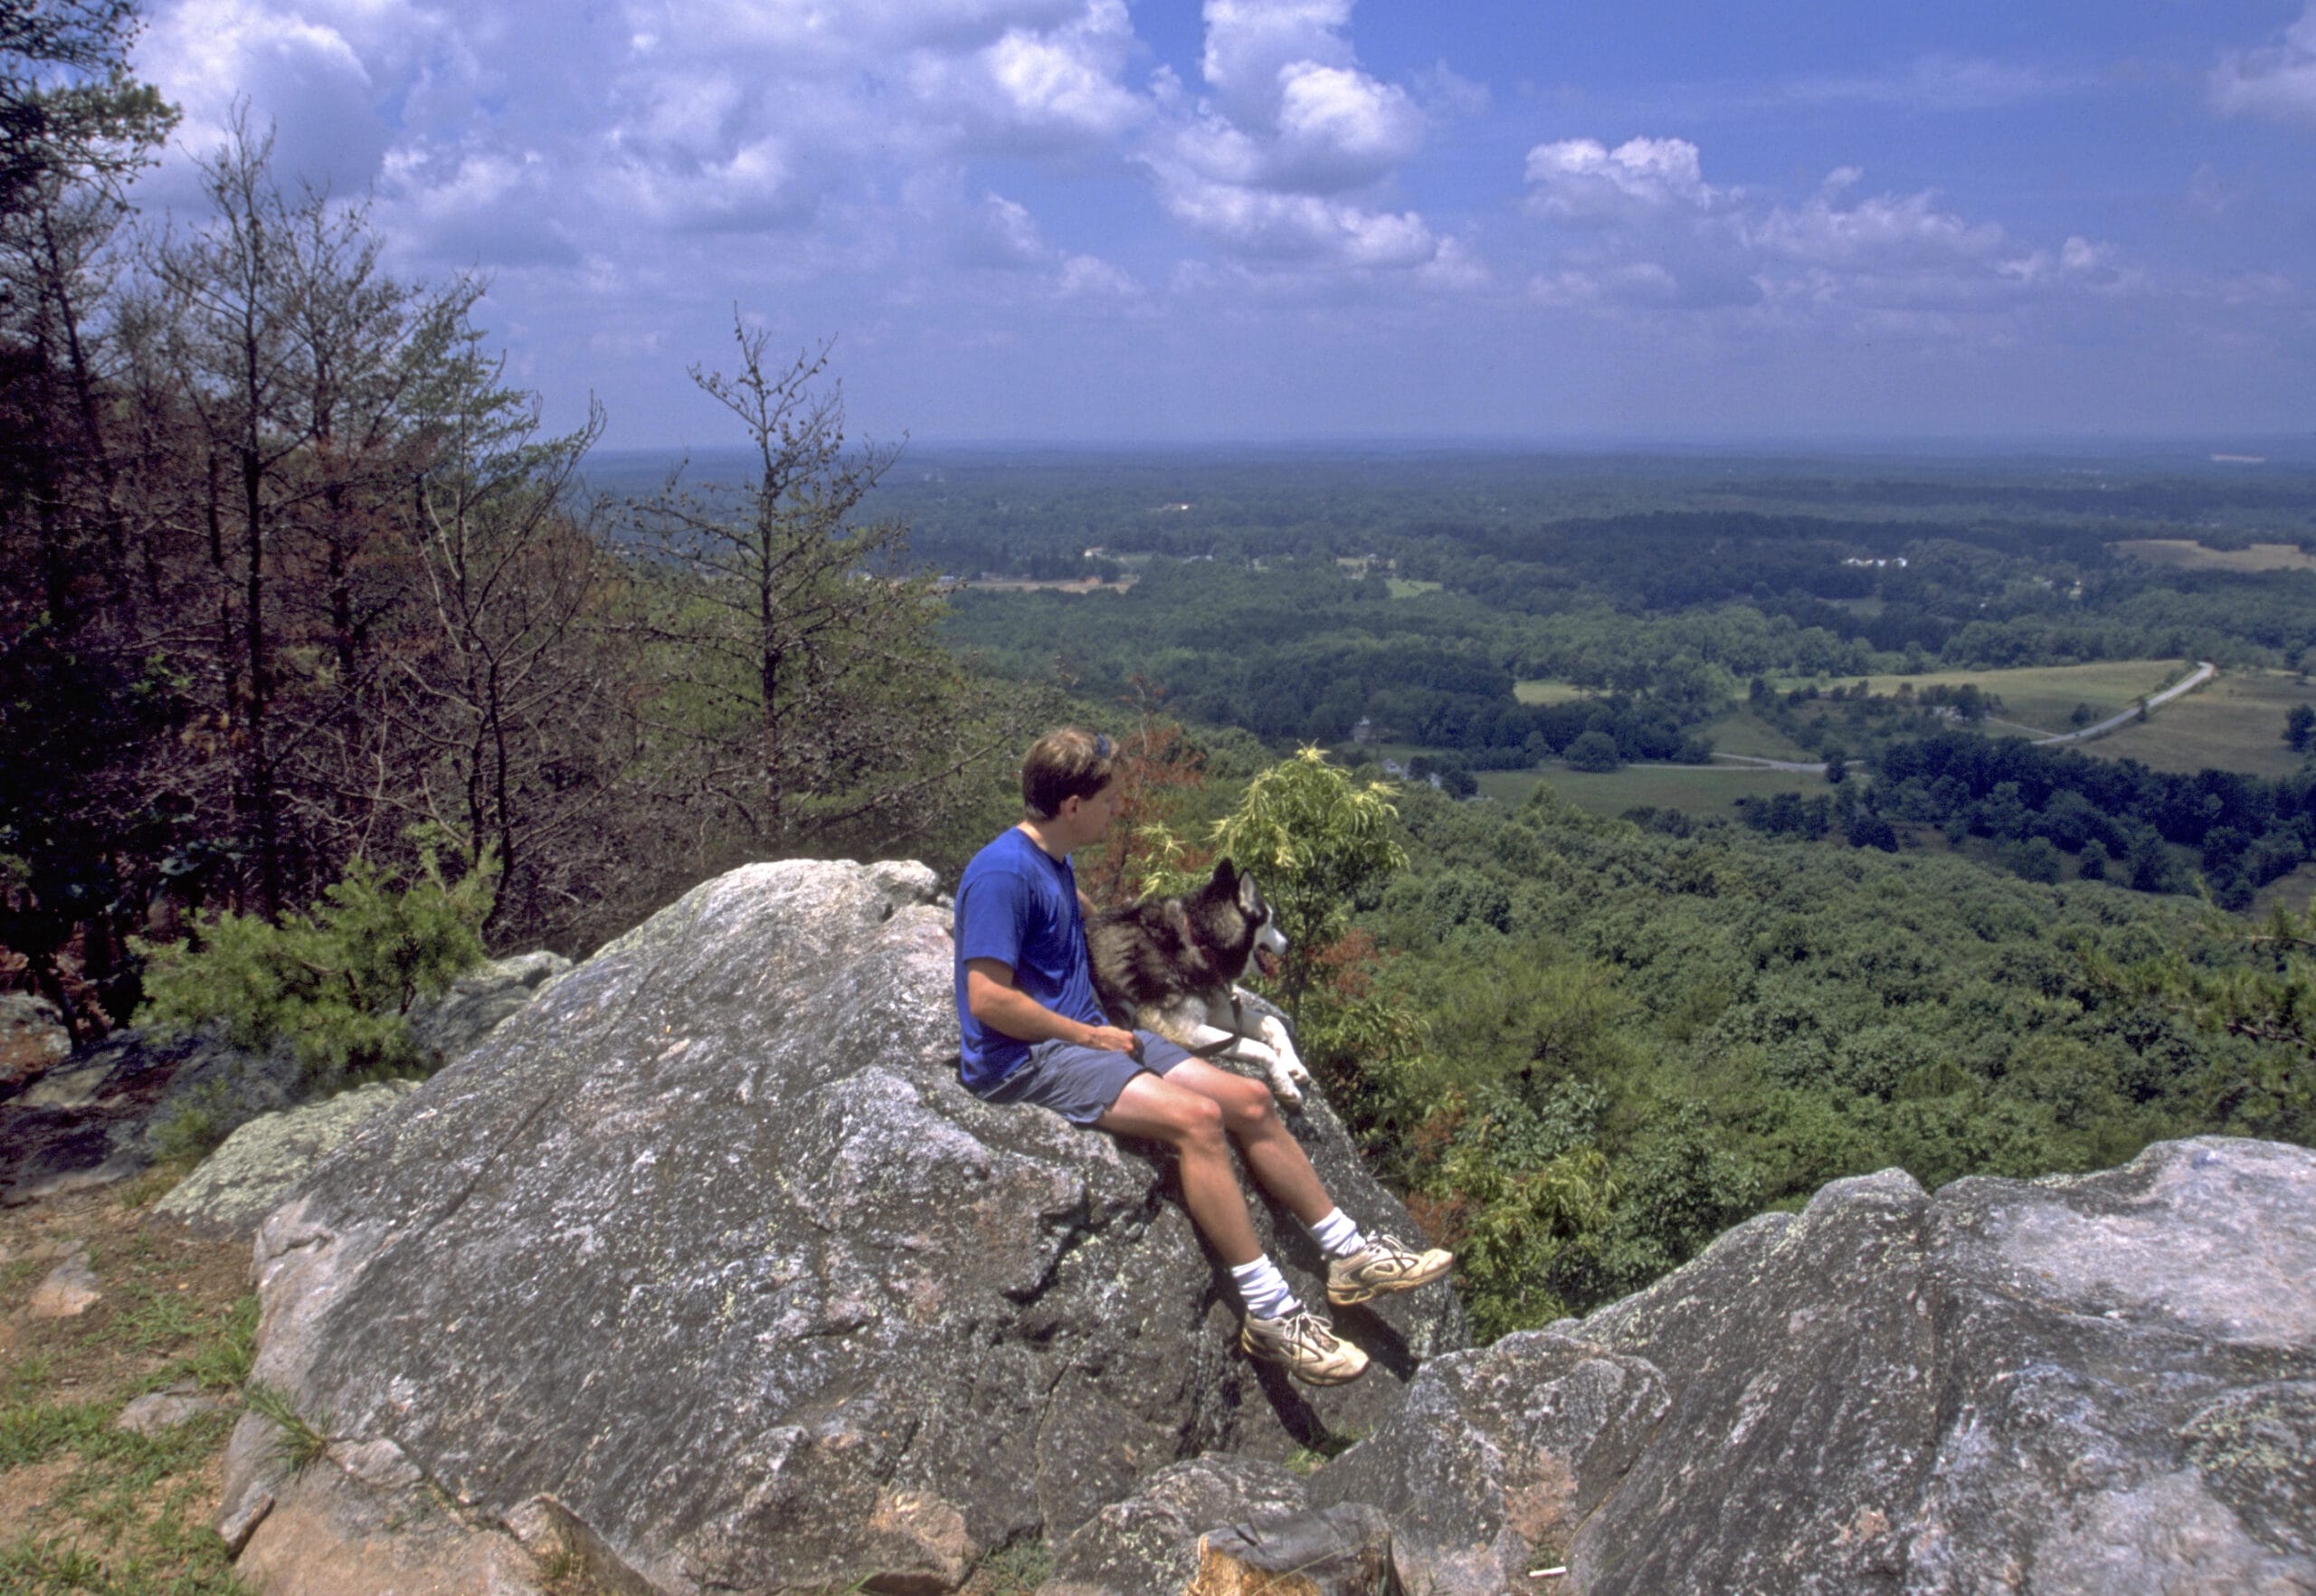 A man sitting on a rock with his dog.